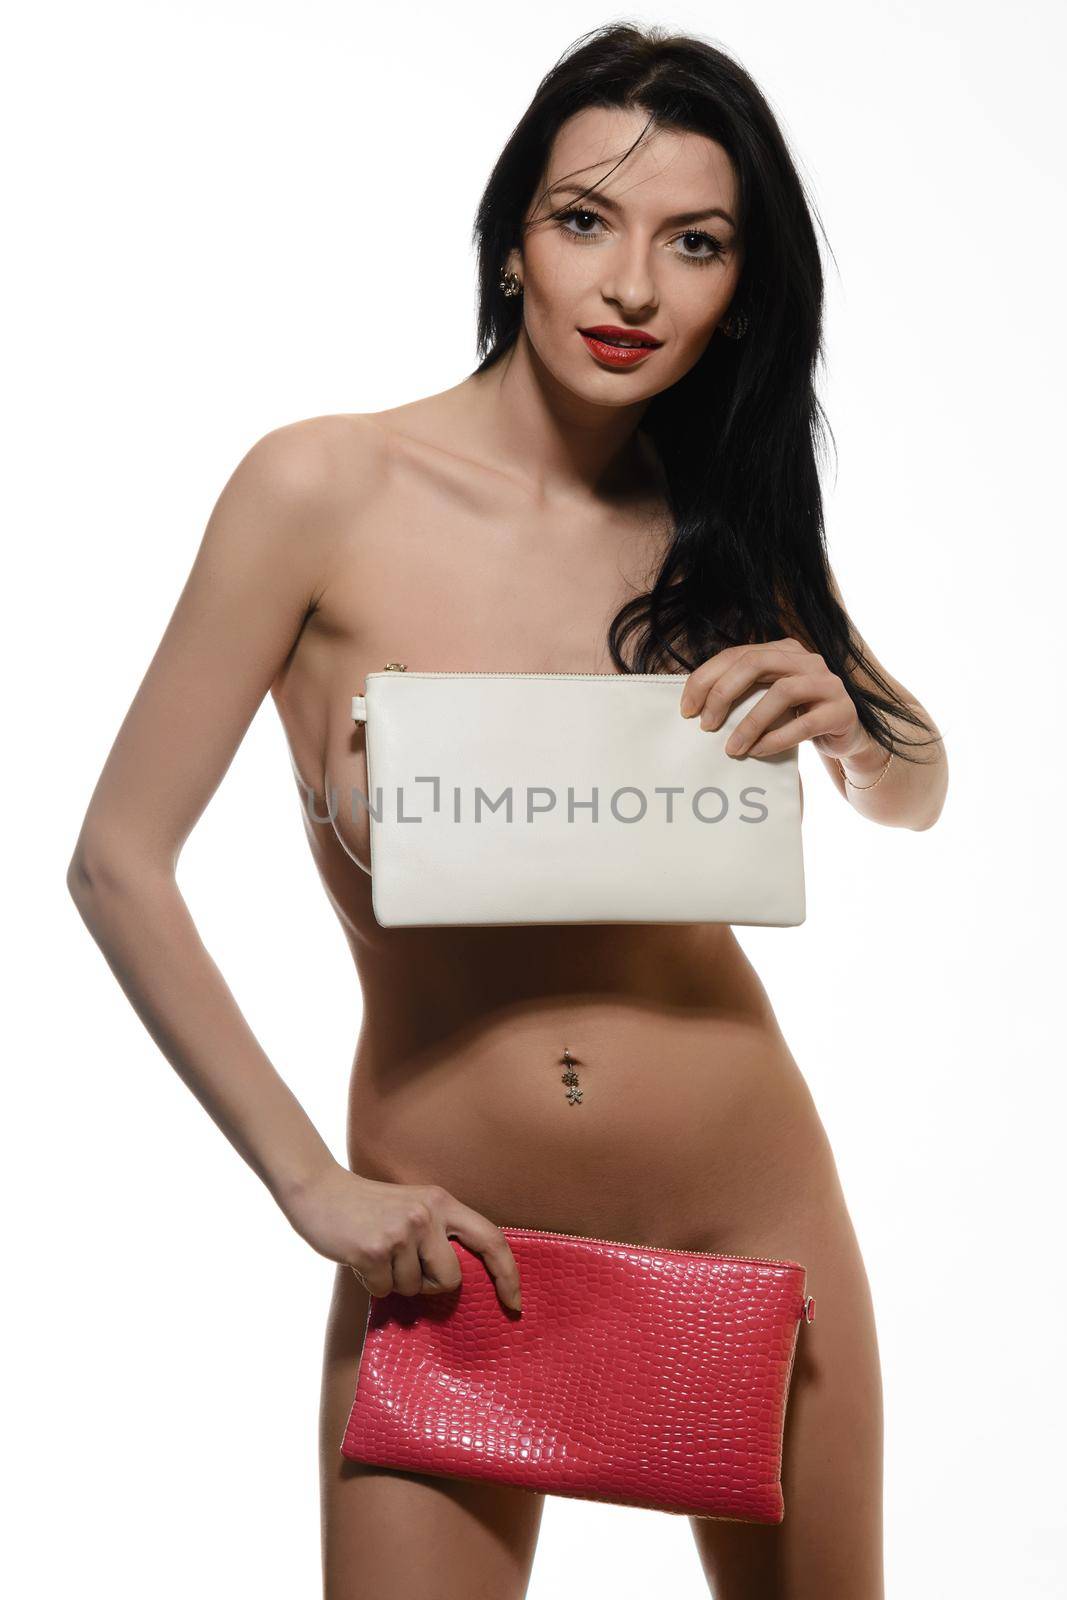 Naked young girl holding red and white leather handbag by zartarn